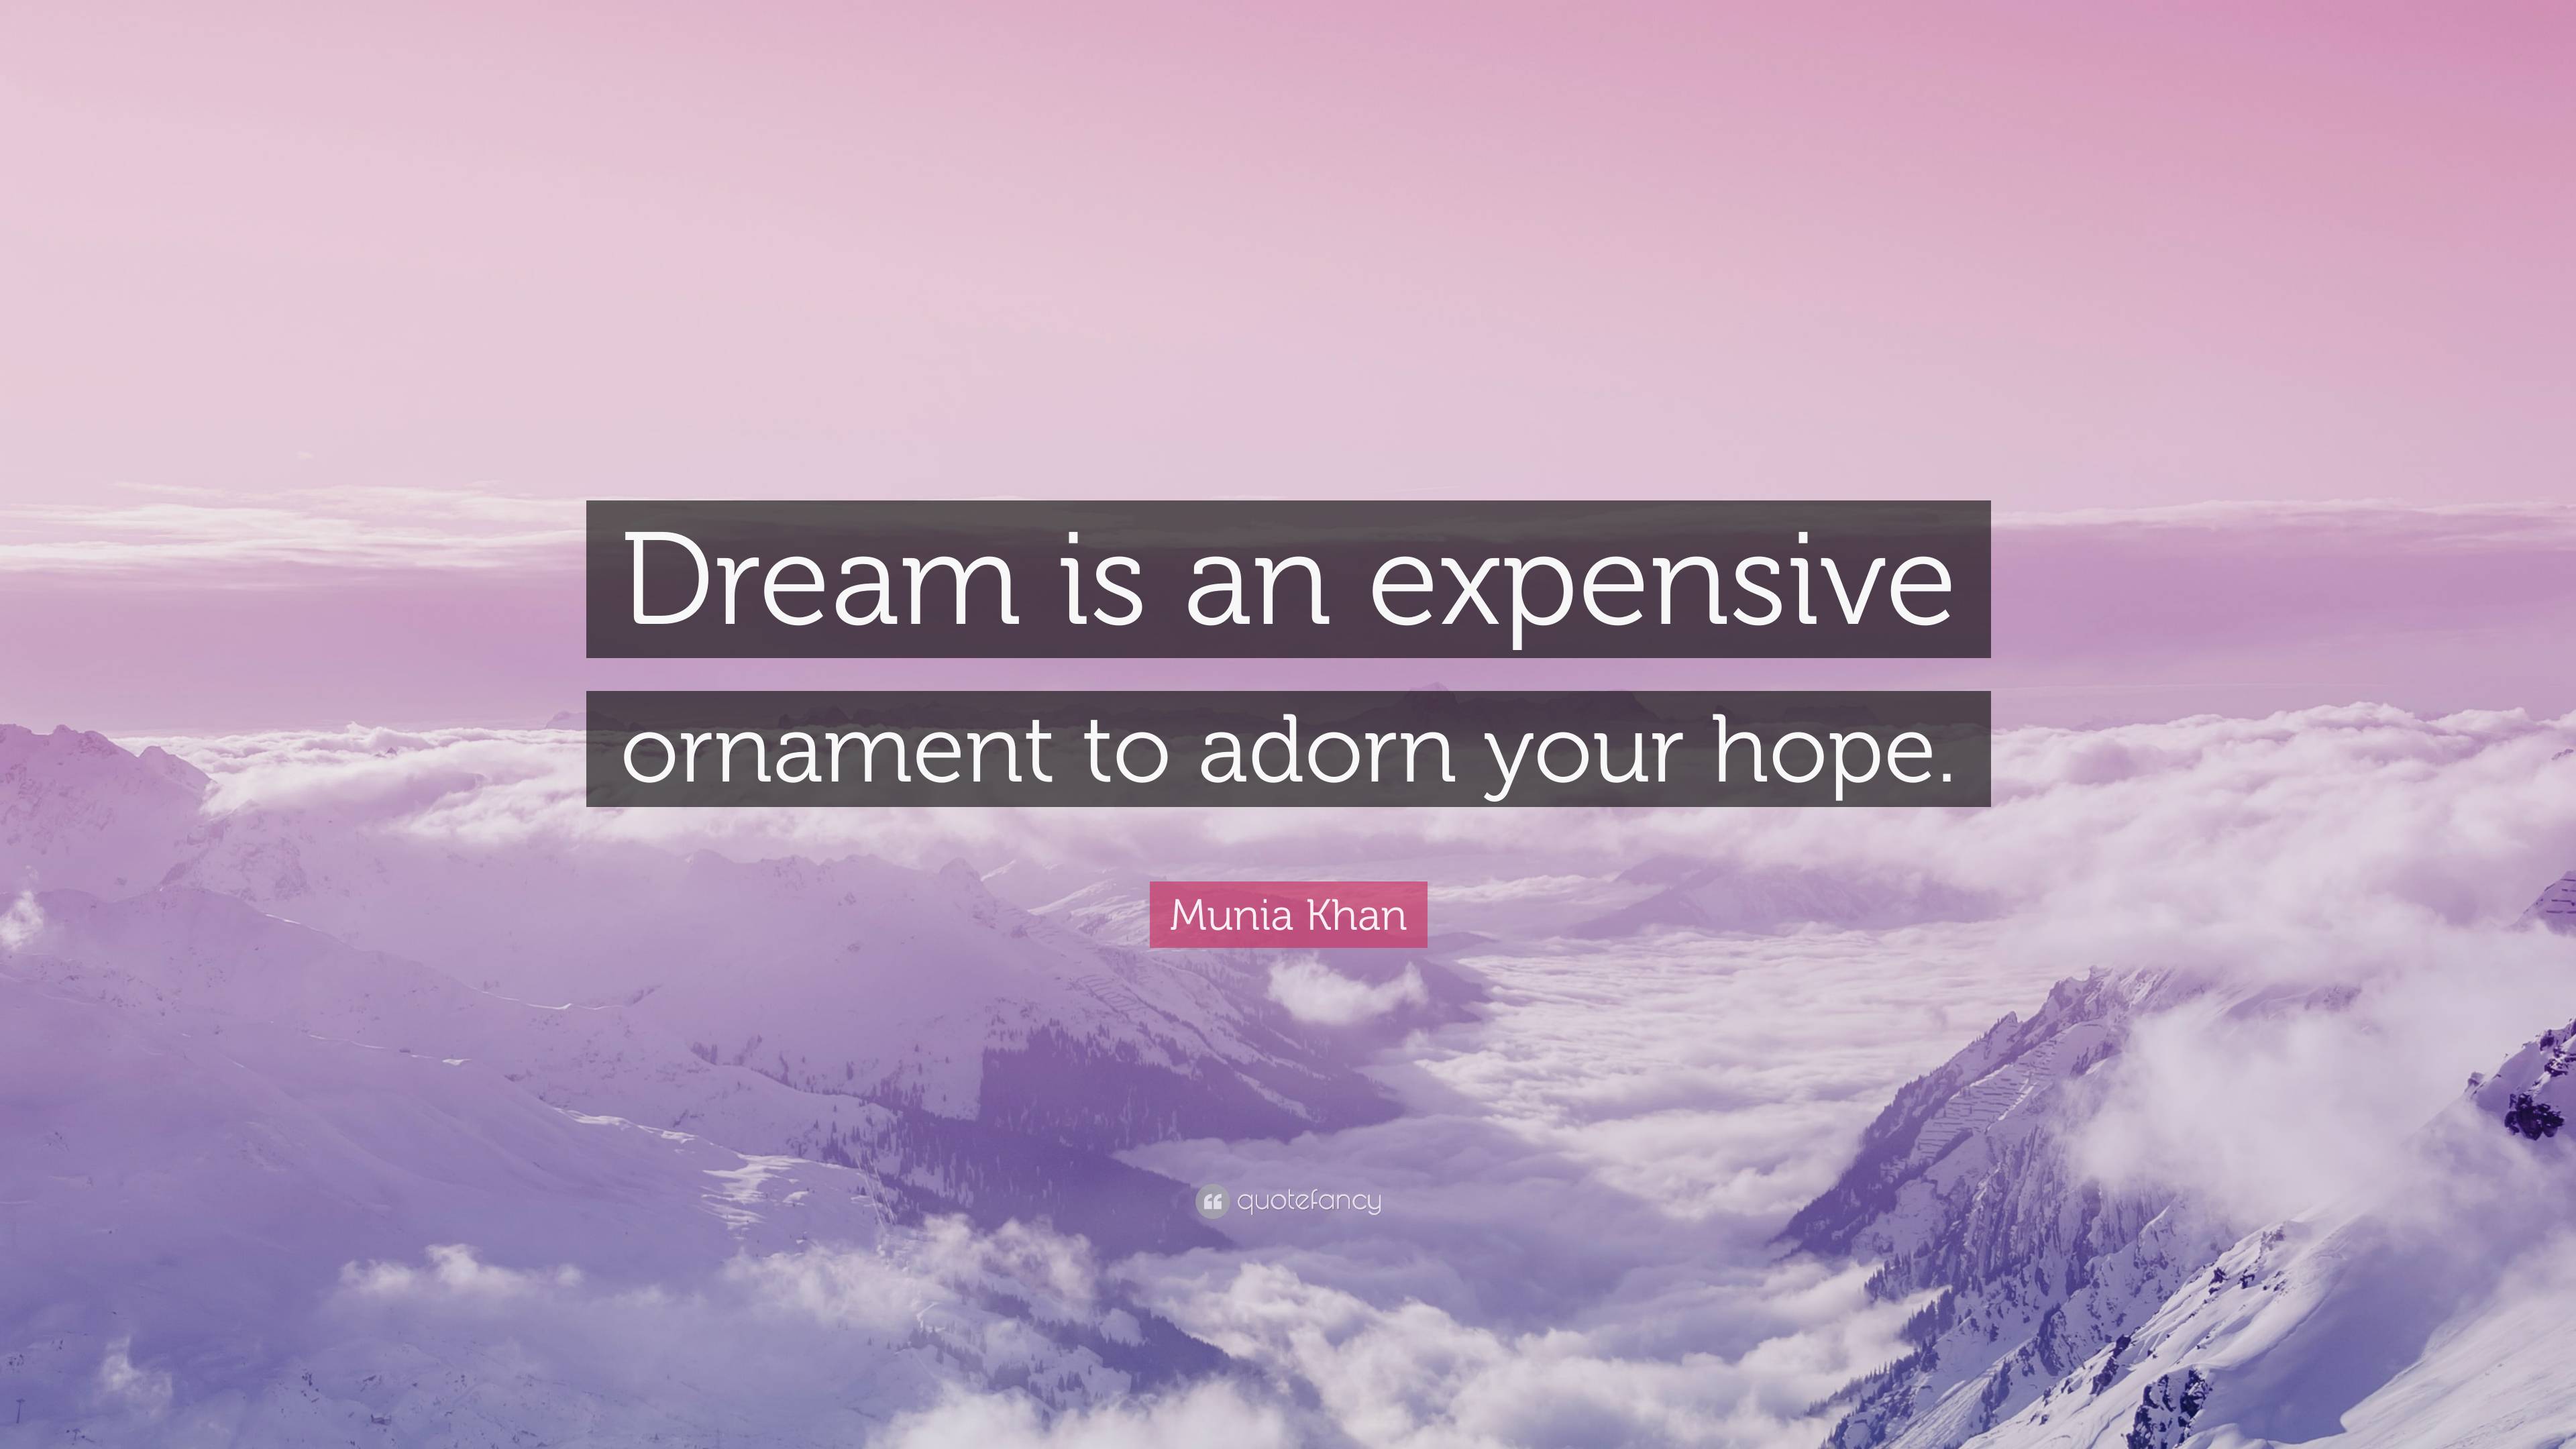 A dream house- the short   Quotes & Writings by Harshita Dawar